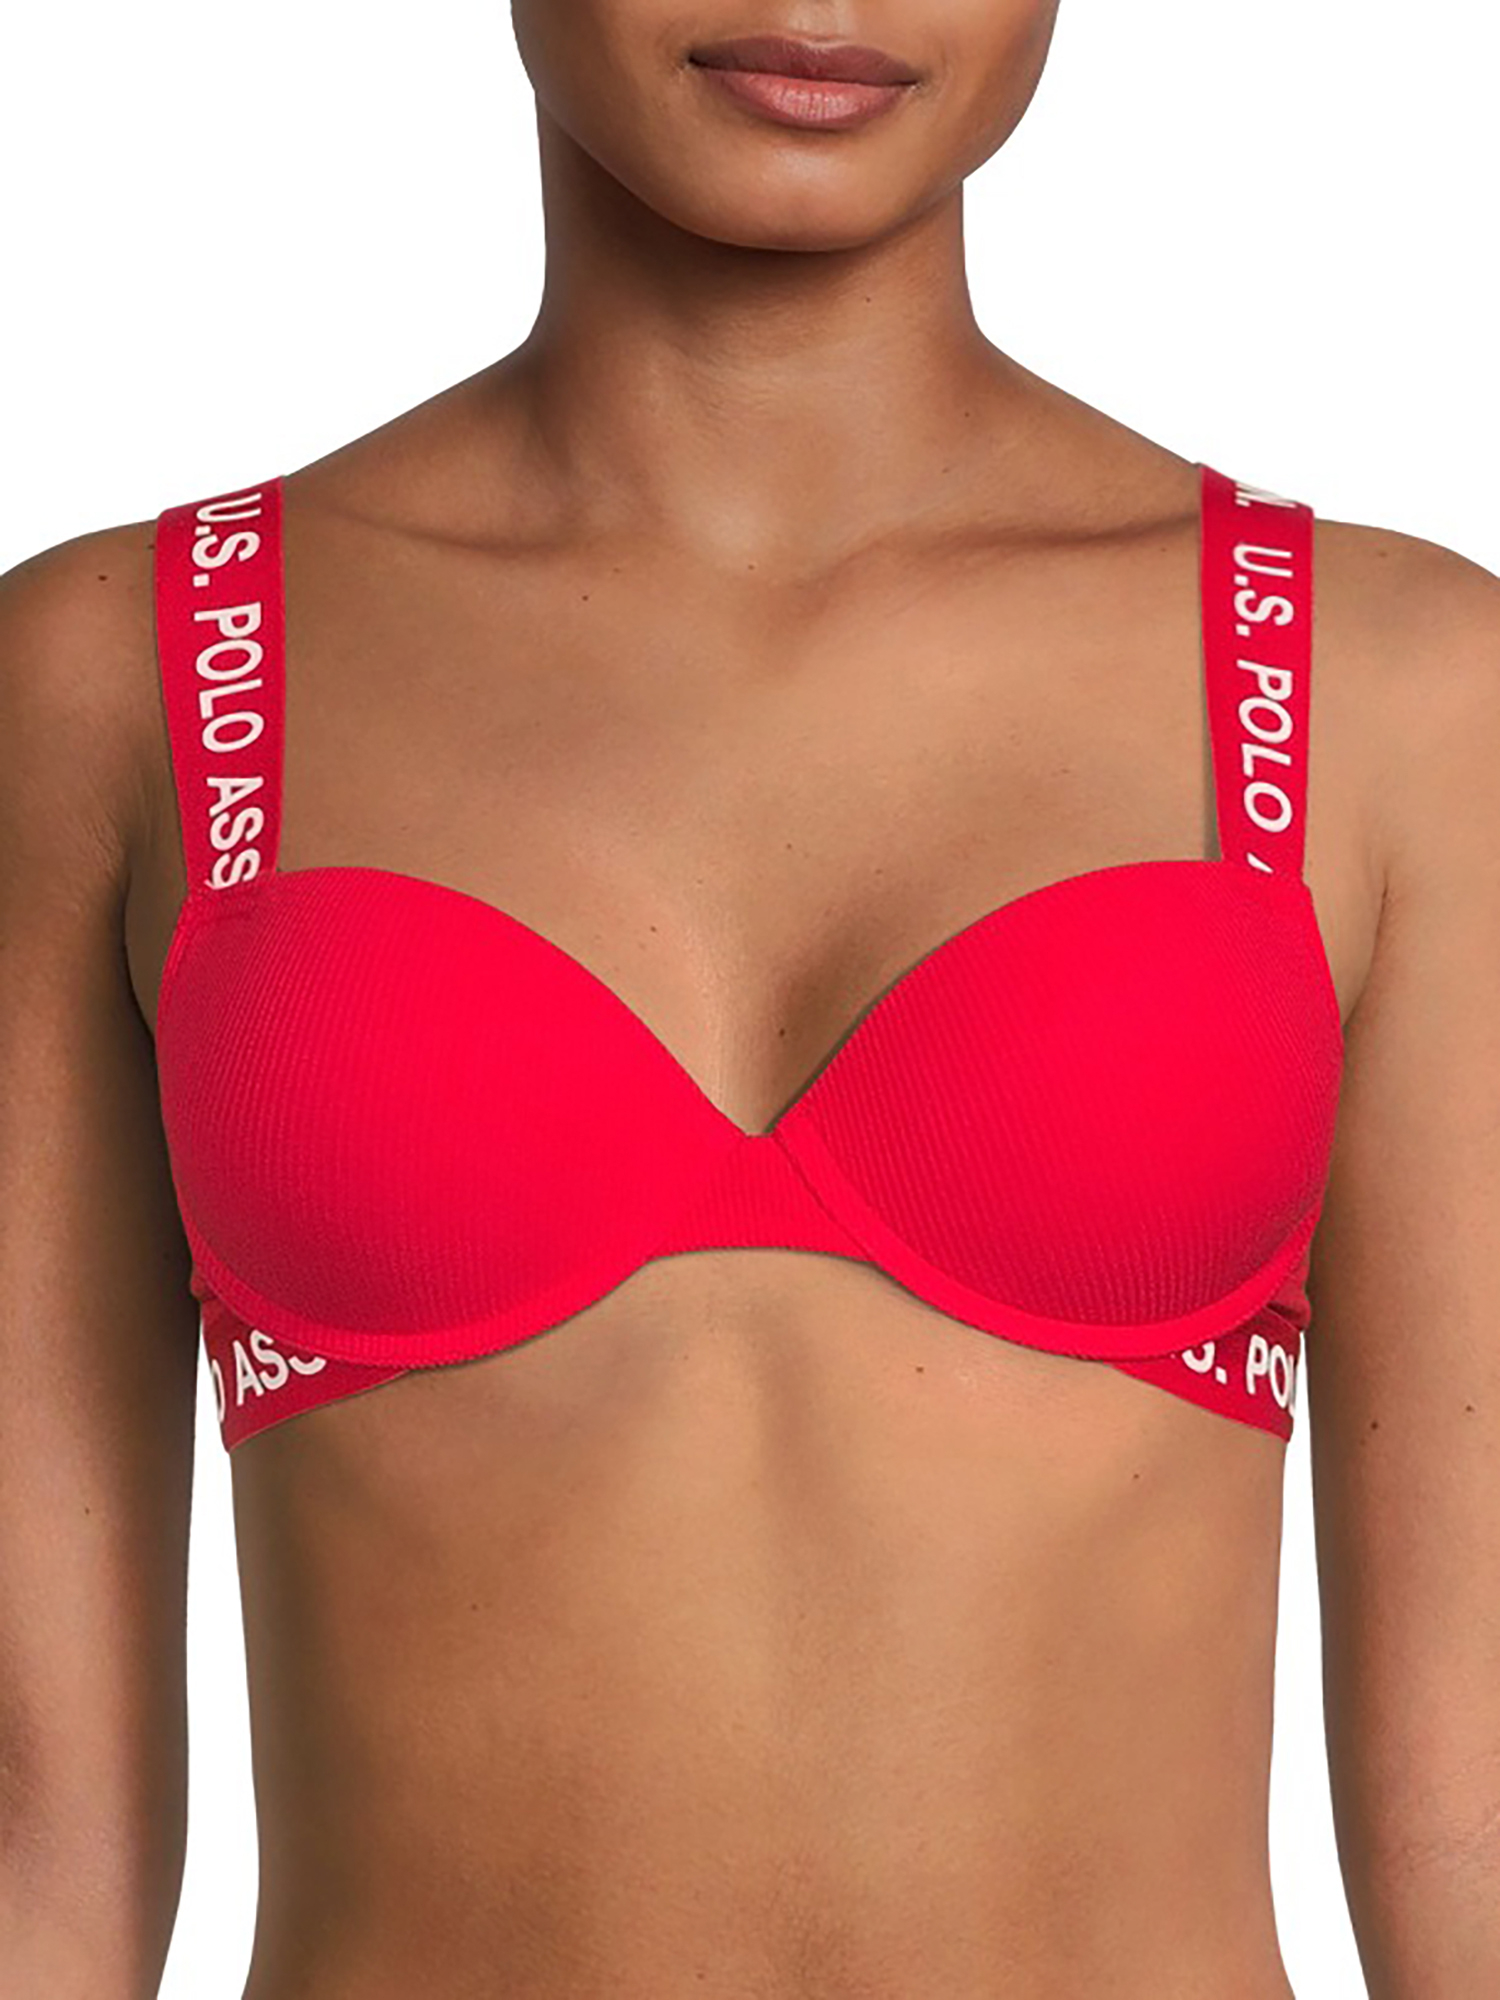 U.S. Polo Assn. Women's 2 Pack Tag-Free Ribbed Cotton Spandex Push Up Bra Set - image 2 of 4